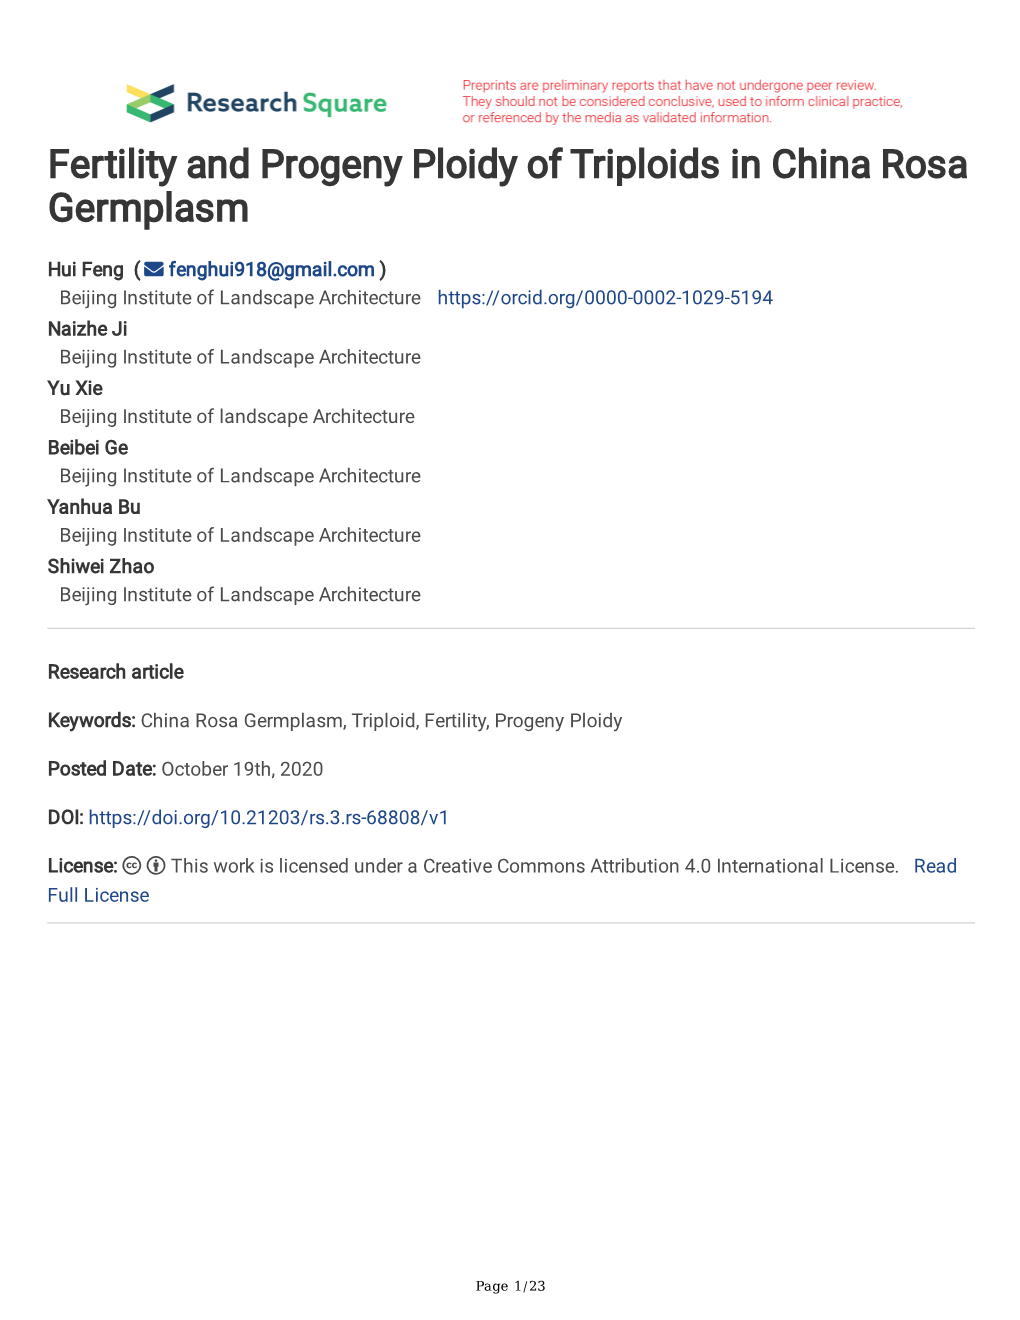 Fertility and Progeny Ploidy of Triploids in China Rosa Germplasm